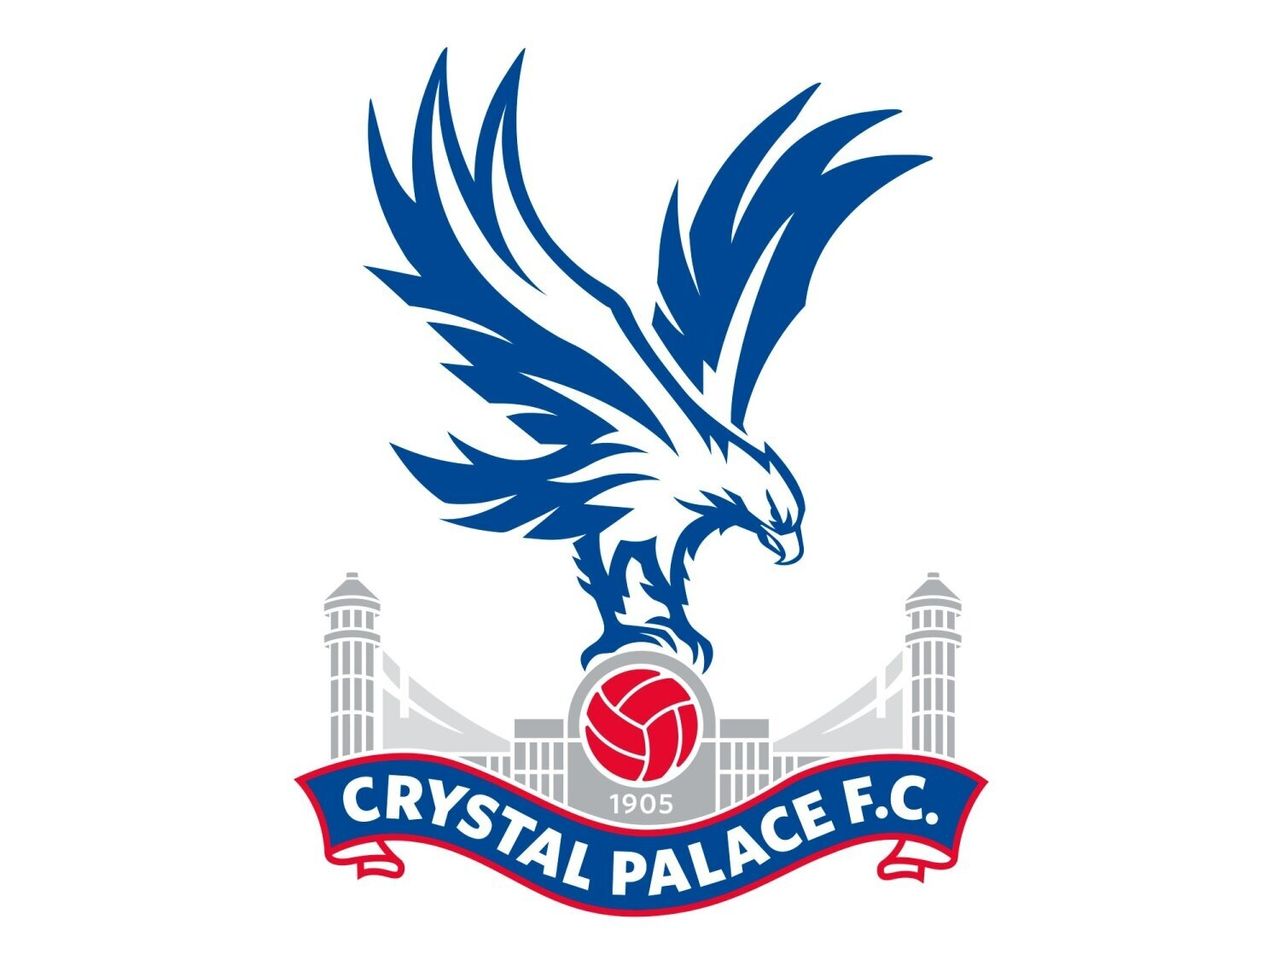 Crystal Palace’s club doctor has said he and his family were racially abused by a young child